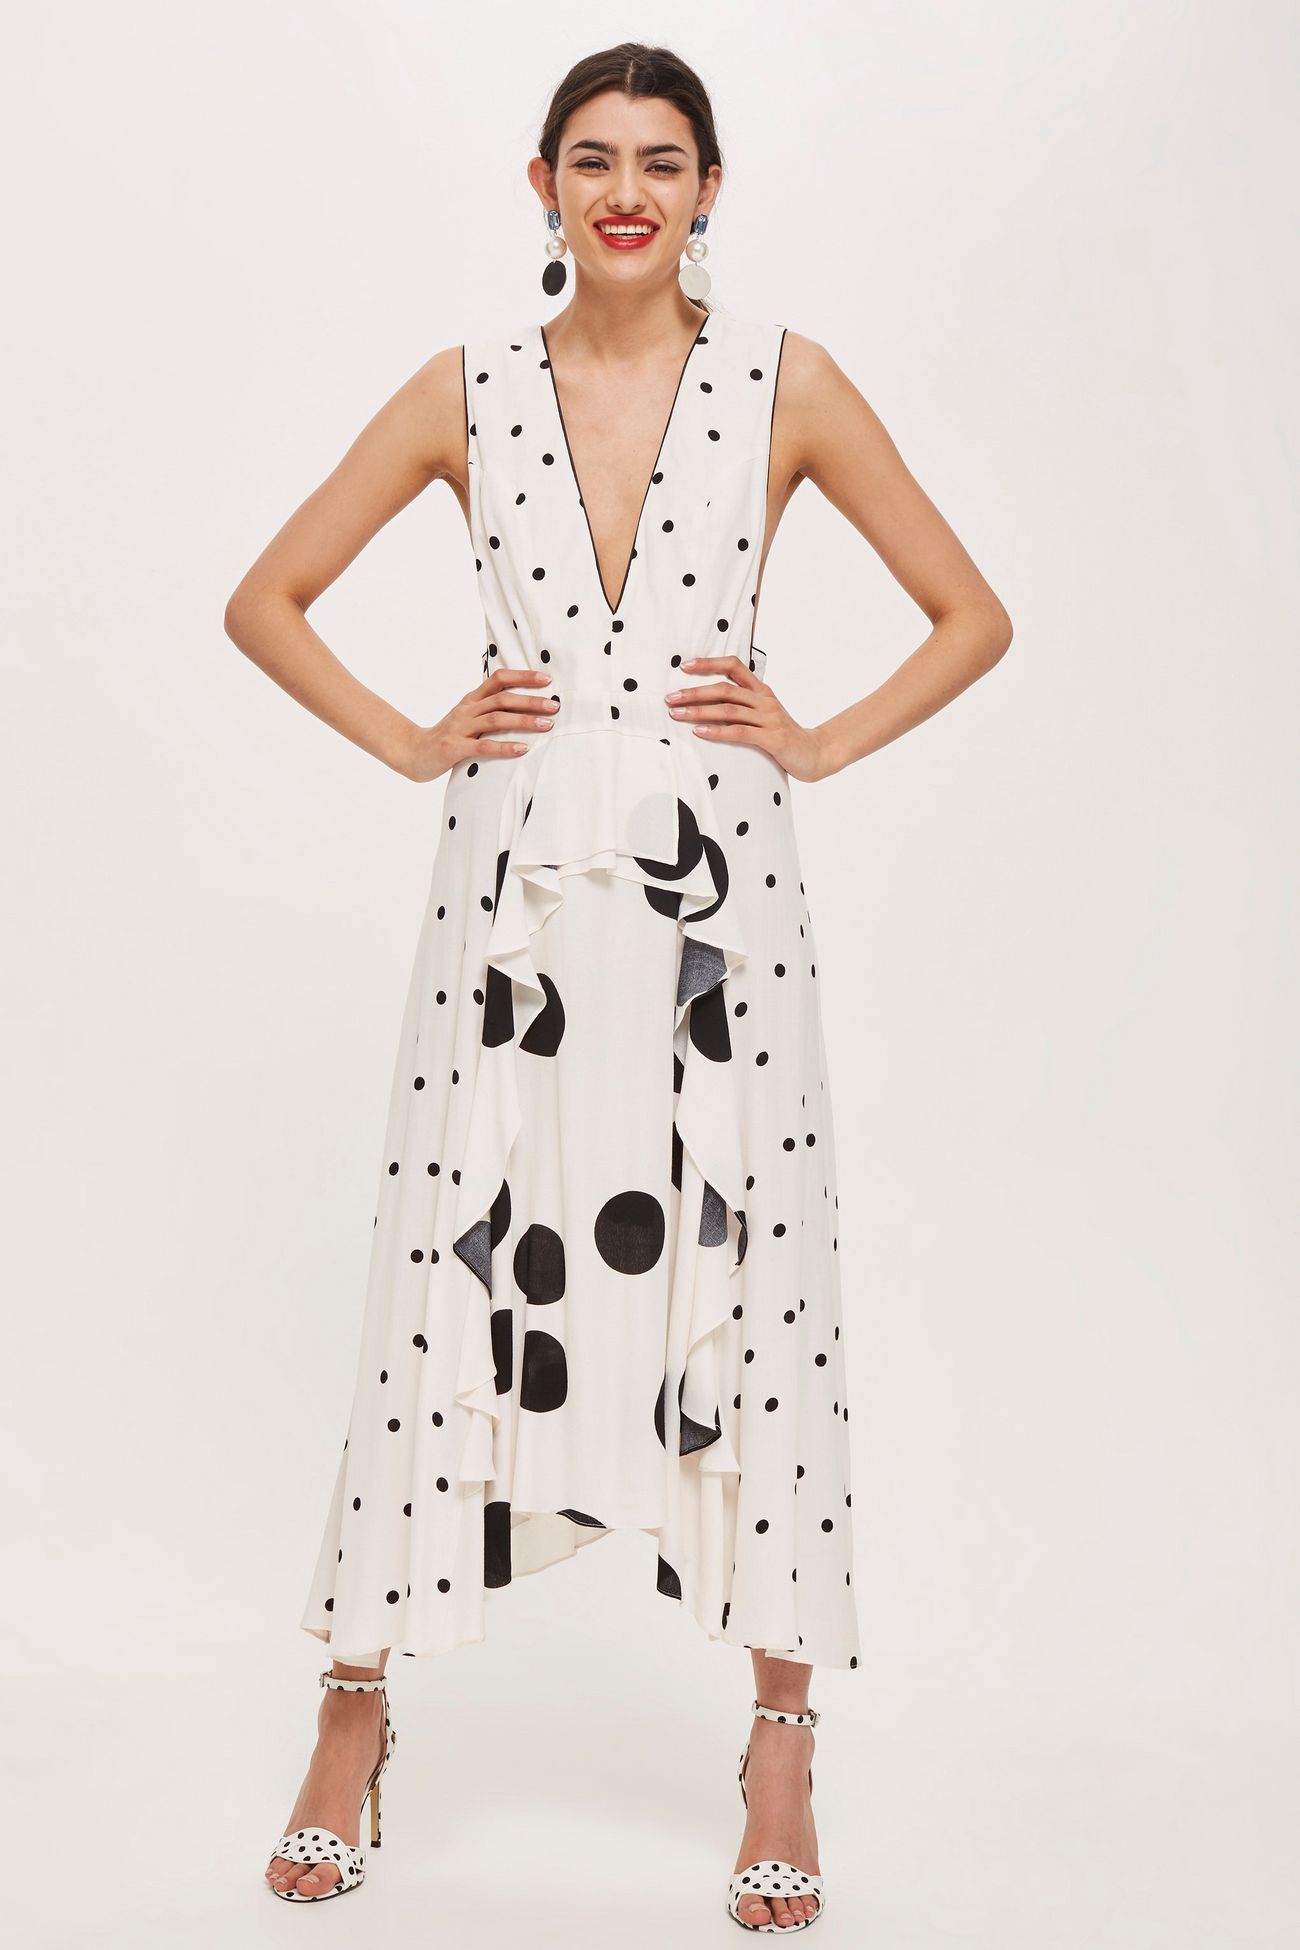 topshop white dress with black spots